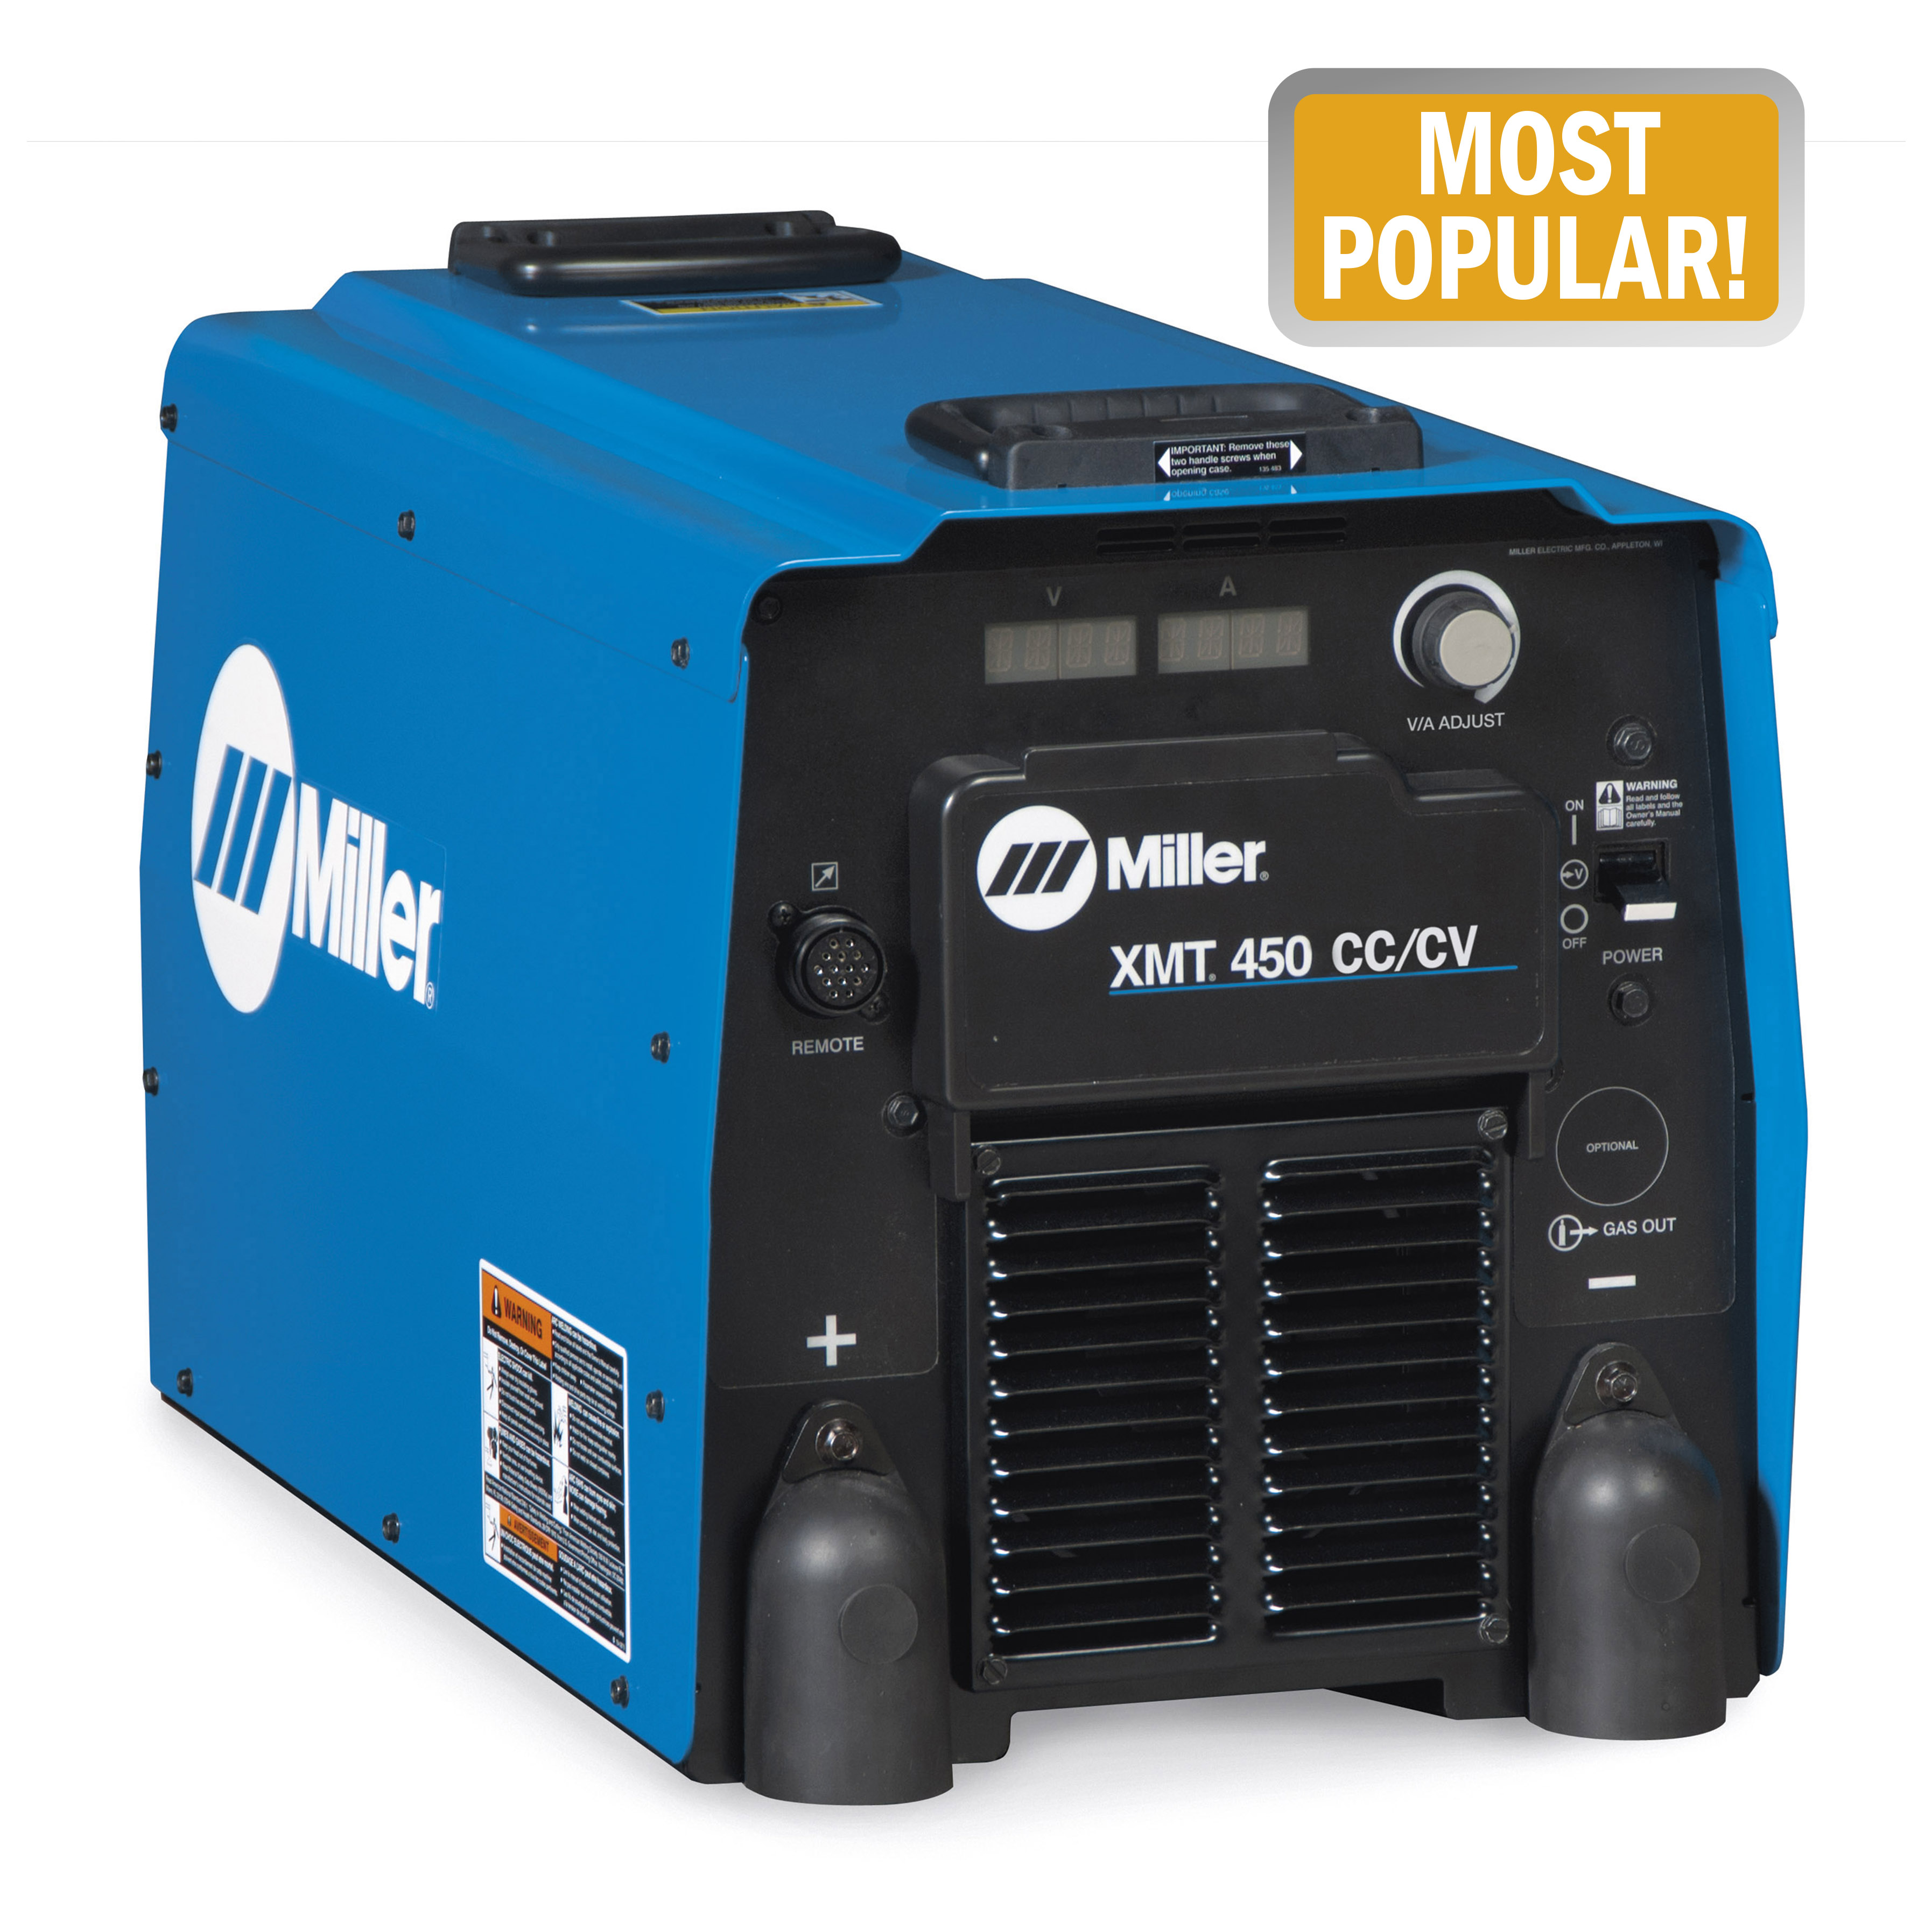 Miller XMT 450 CC/CV 230 - 460 Volt 3 Phase 60 Hz Multi Process Welding Power Source Without Auxiliary Power